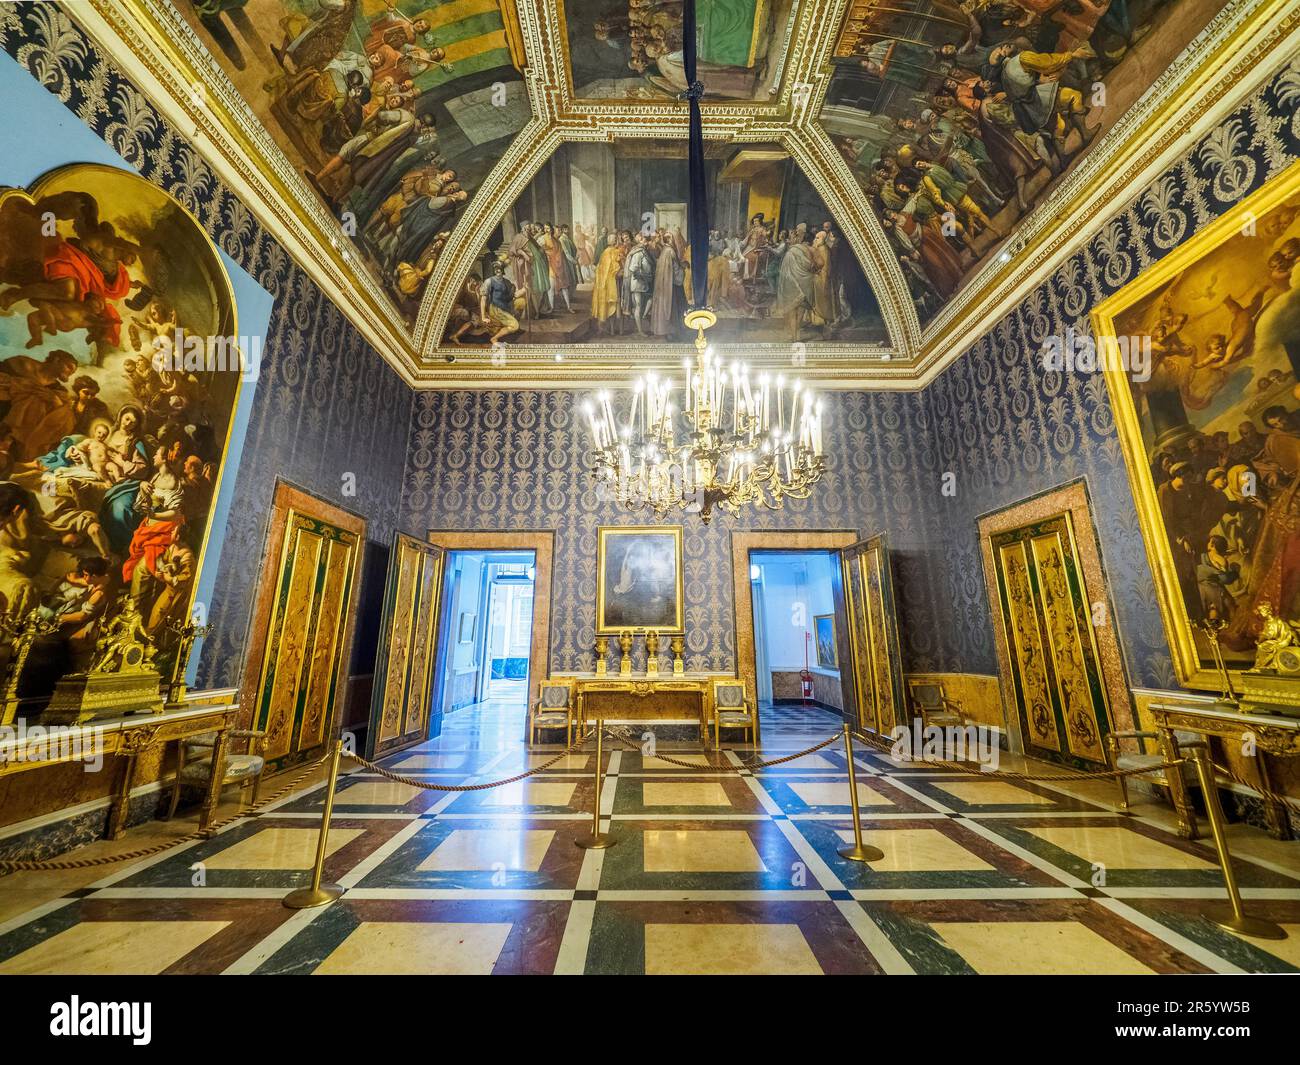 The second Antechamber with ceilings featuring paintings from the period of Spanish Viceroy and wall paintings from the late 18th and 17th centuries in the Royal Palace of Naples that In 1734 became the royal residence of the Bourbons - Naples, Italy Stock Photo